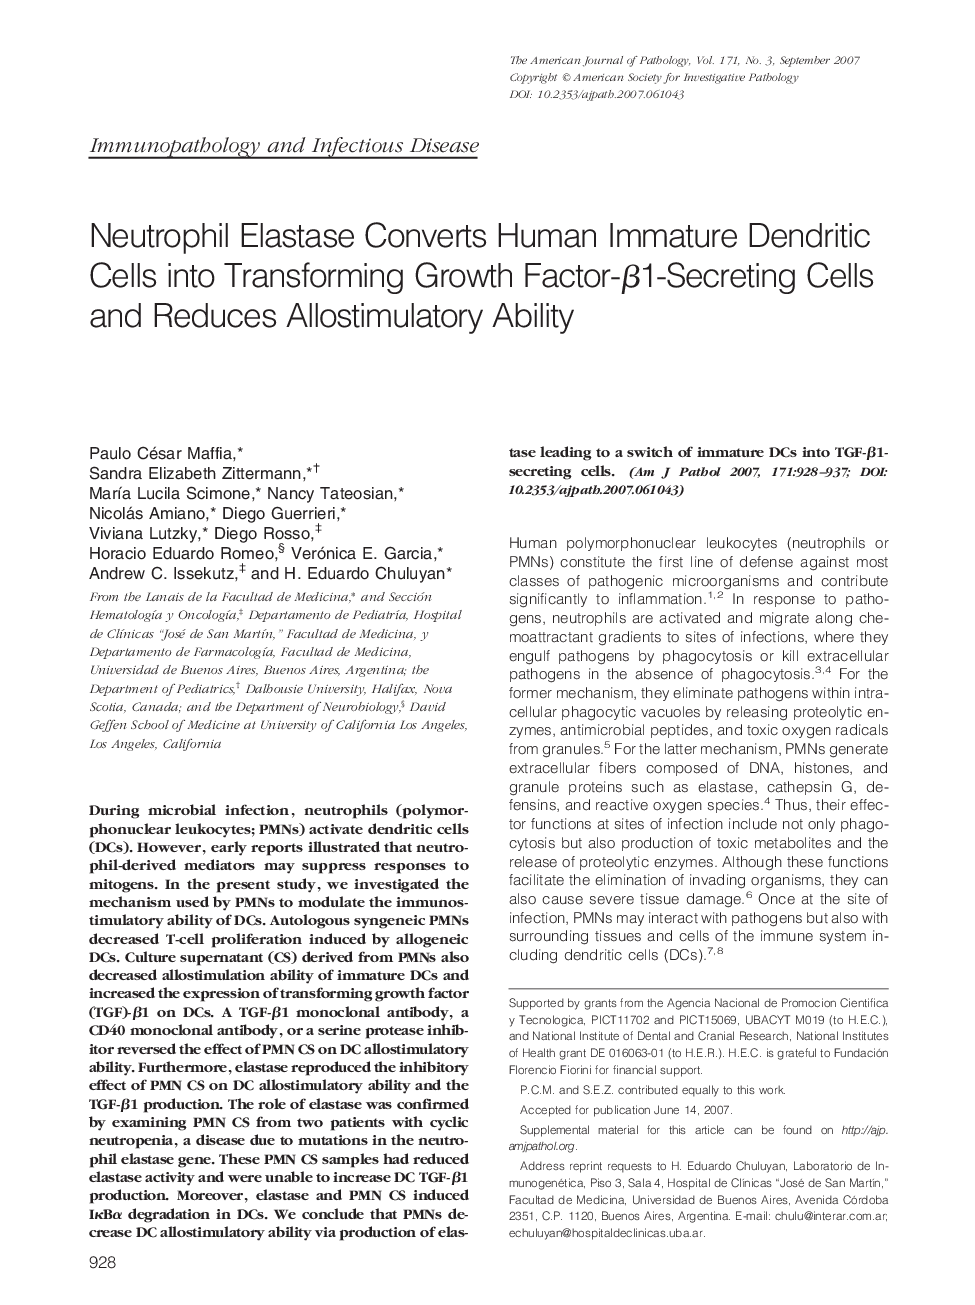 Neutrophil Elastase Converts Human Immature Dendritic Cells into Transforming Growth Factor-Î²1-Secreting Cells and Reduces Allostimulatory Ability